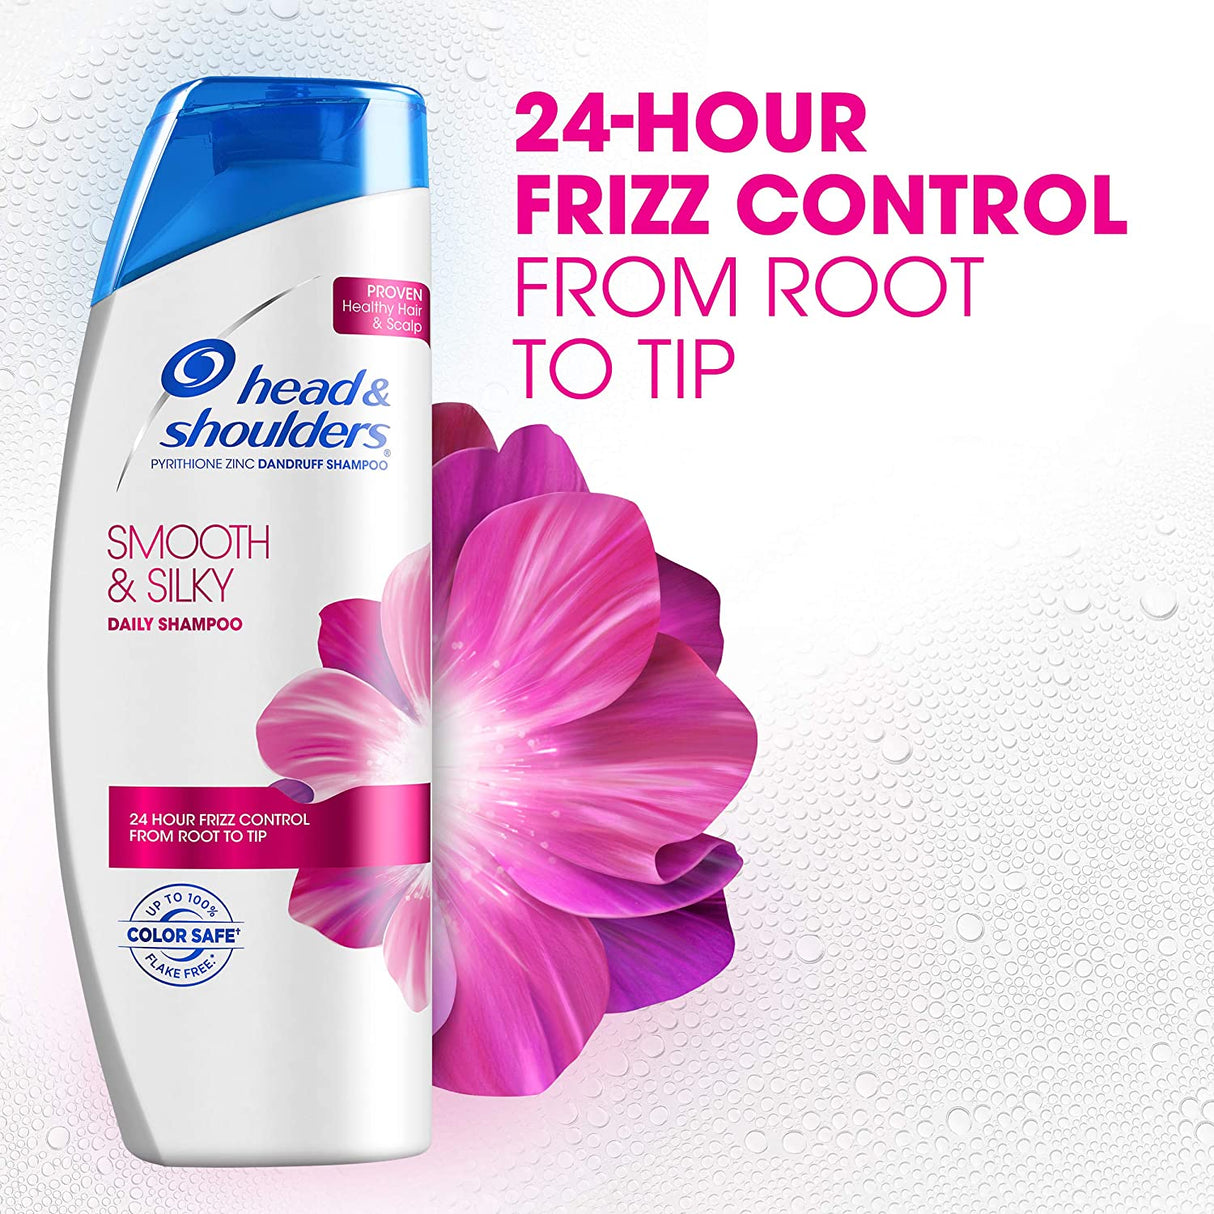 Head & Shoulders Smooth & Silky Dandruff Shampoo, 21.9 Fluid Ounce Find Your New Look Today!